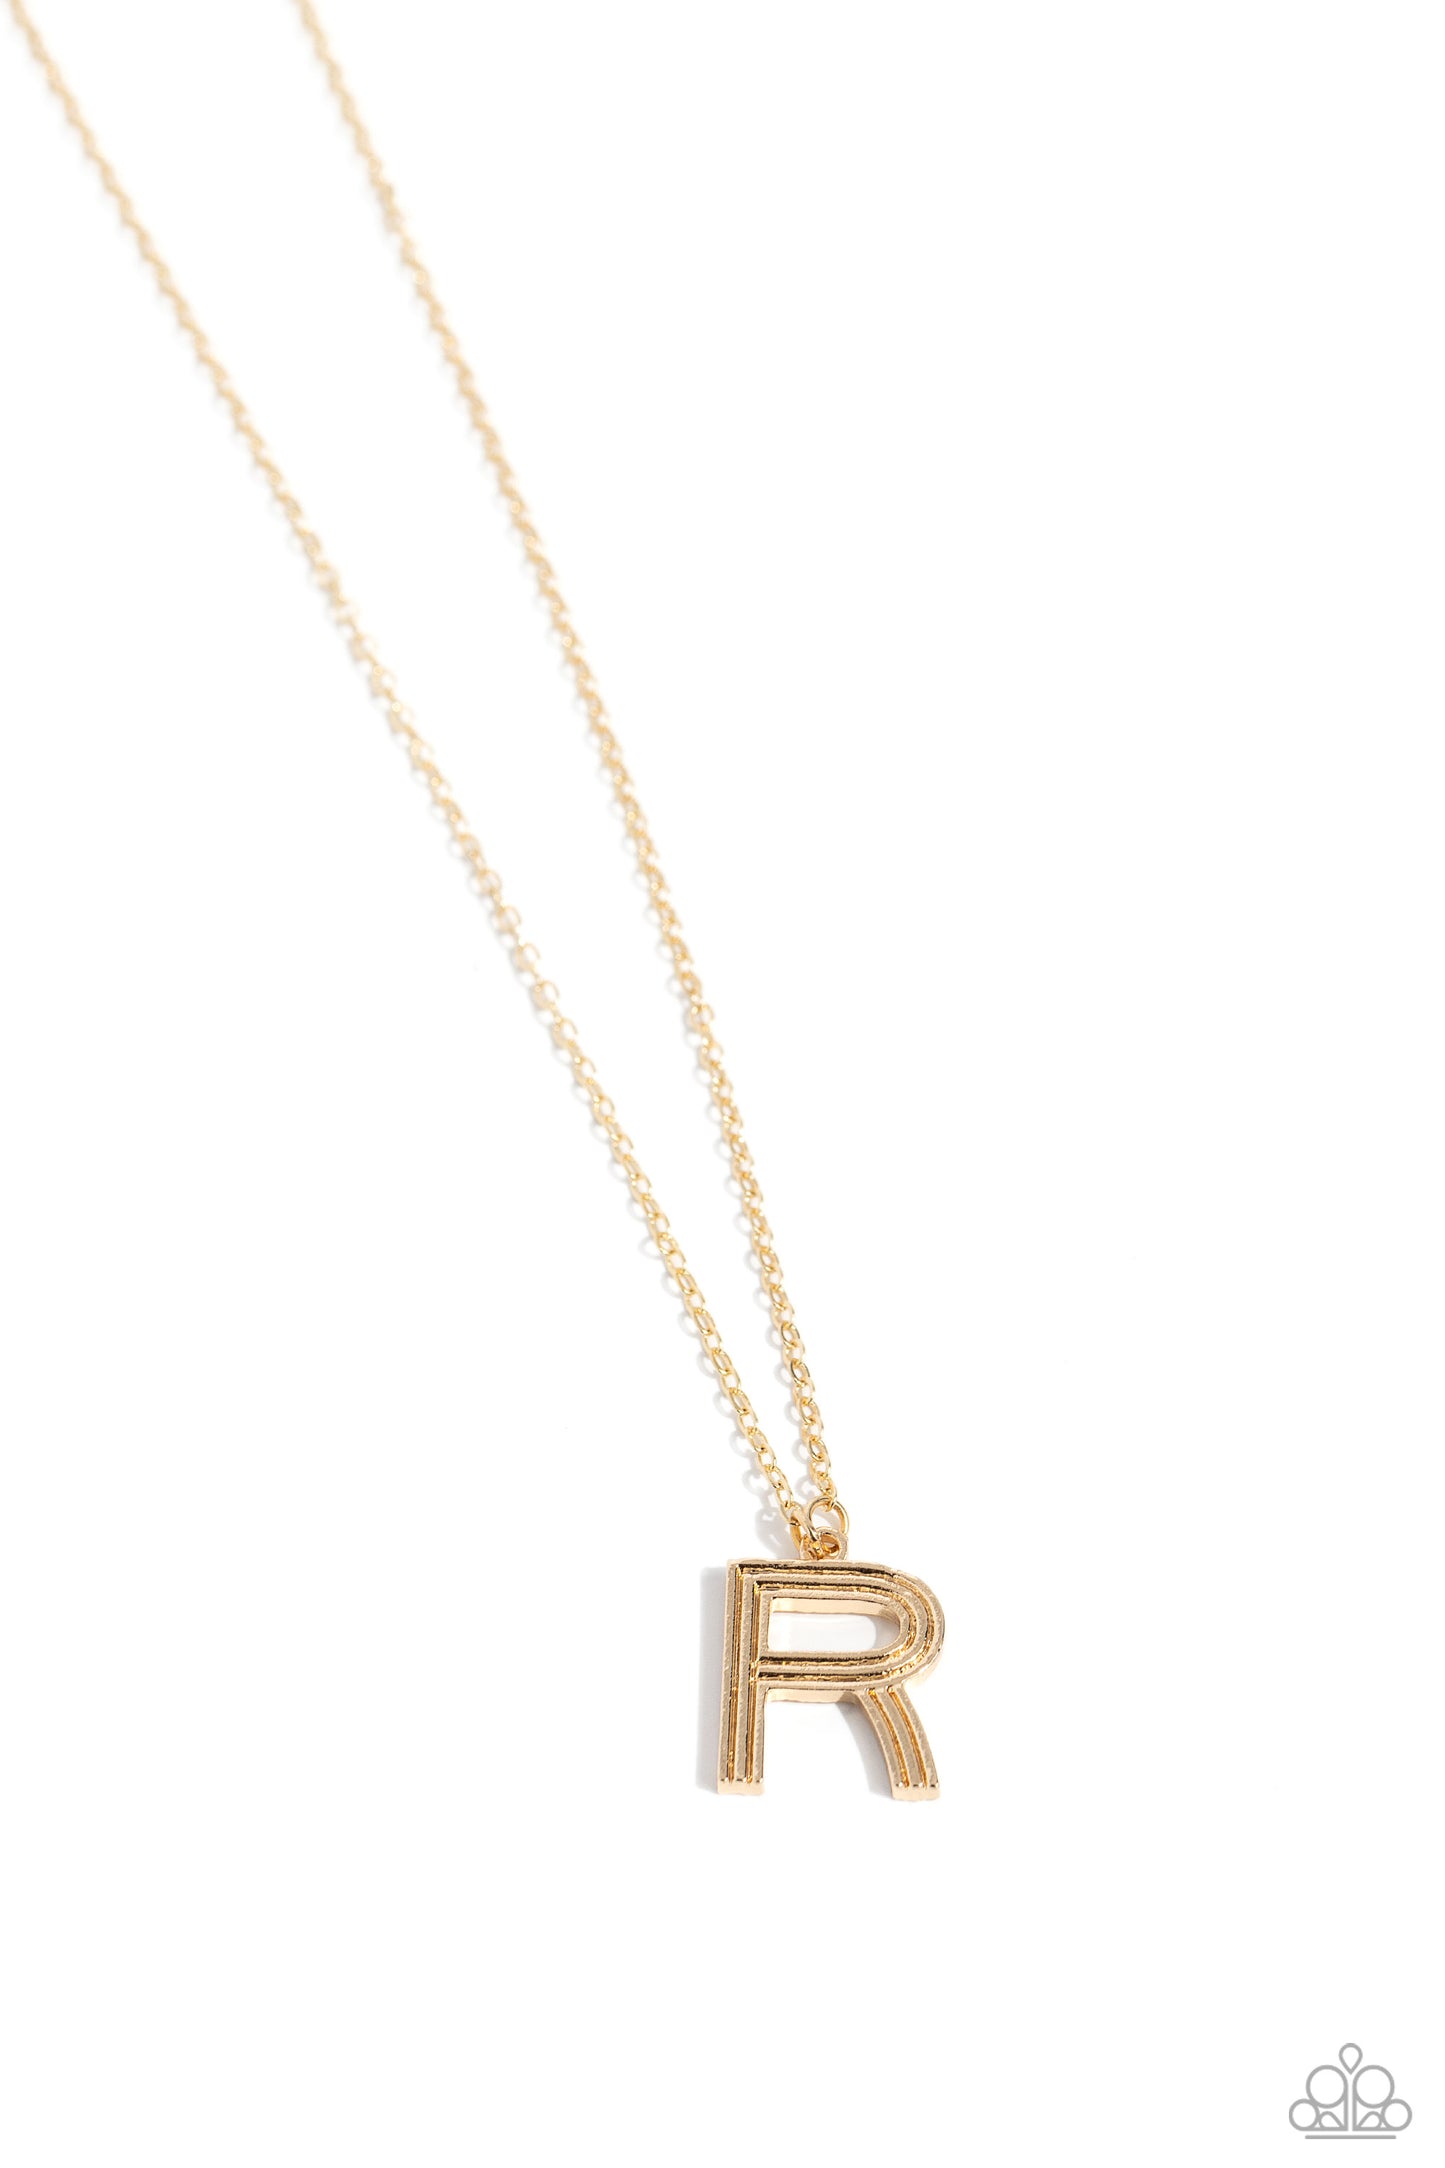 Leave Your Initials Paparazzi Accessories Necklace with Earrings Gold - R